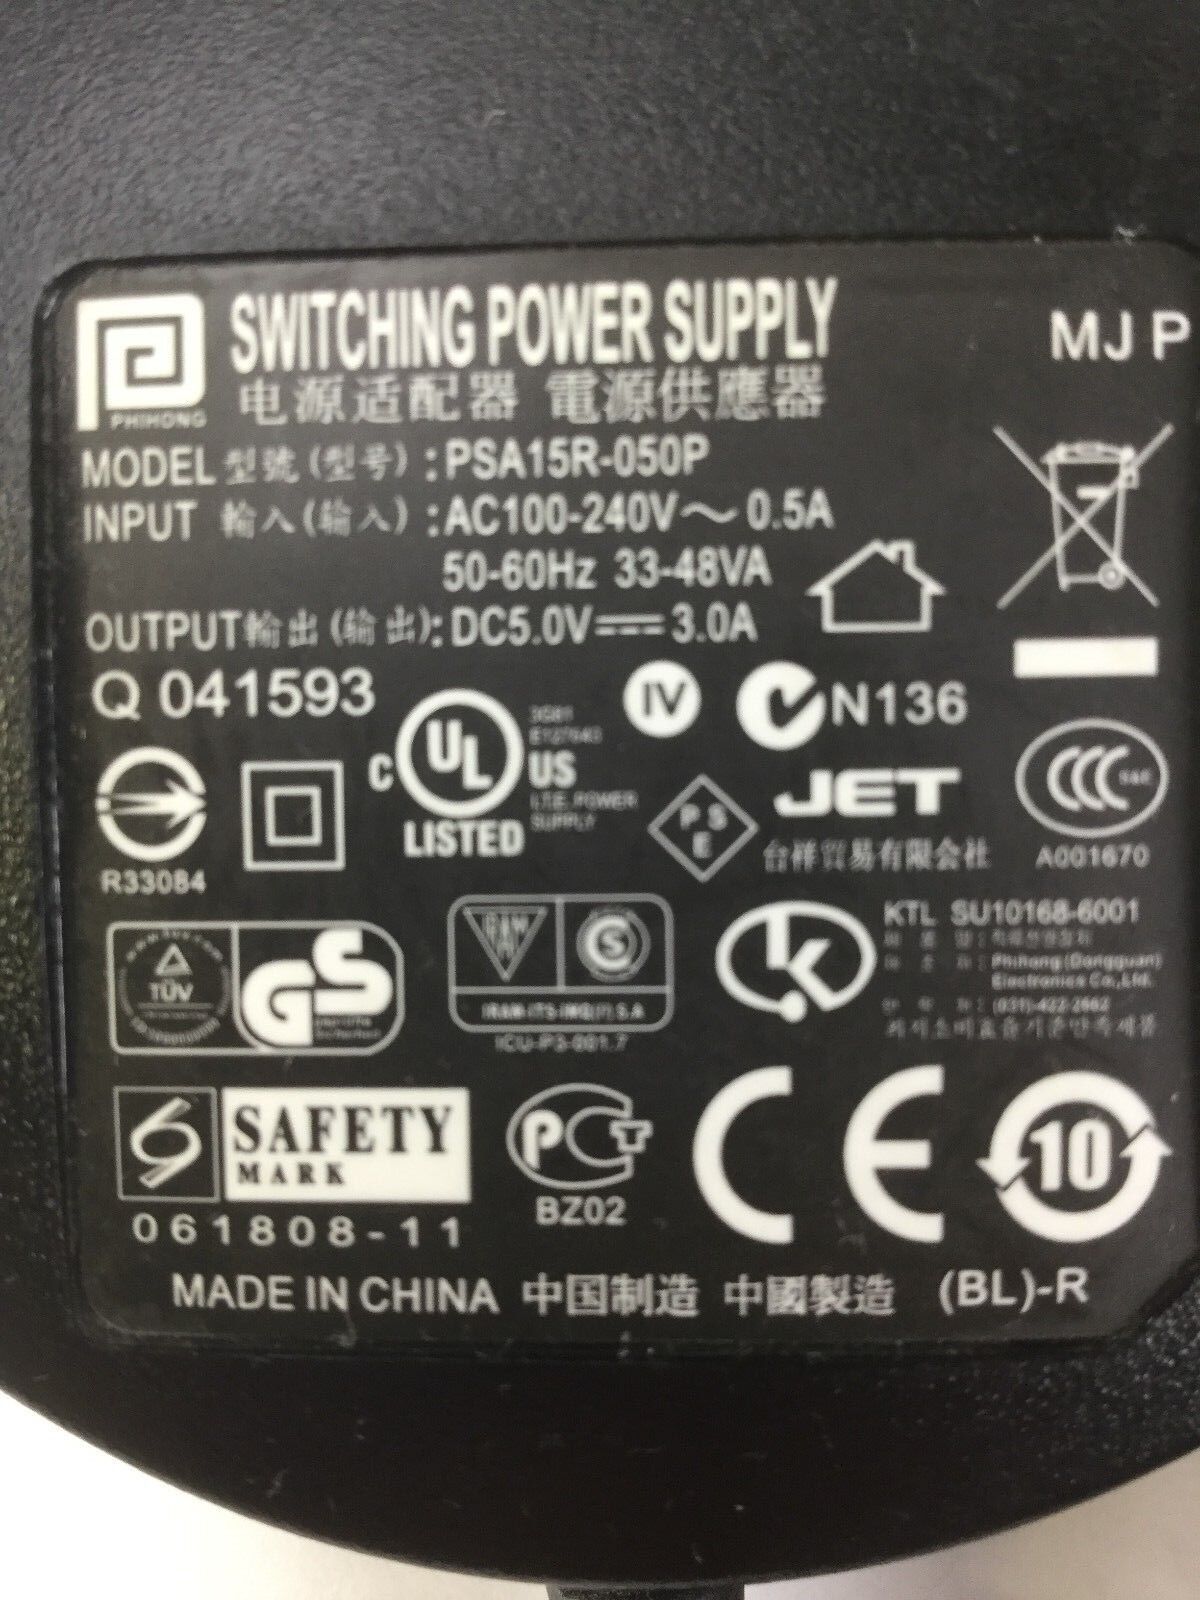 Phihong PSA15R-050P Switching Power Supply Wall Charger Adapter (Lot of 3)